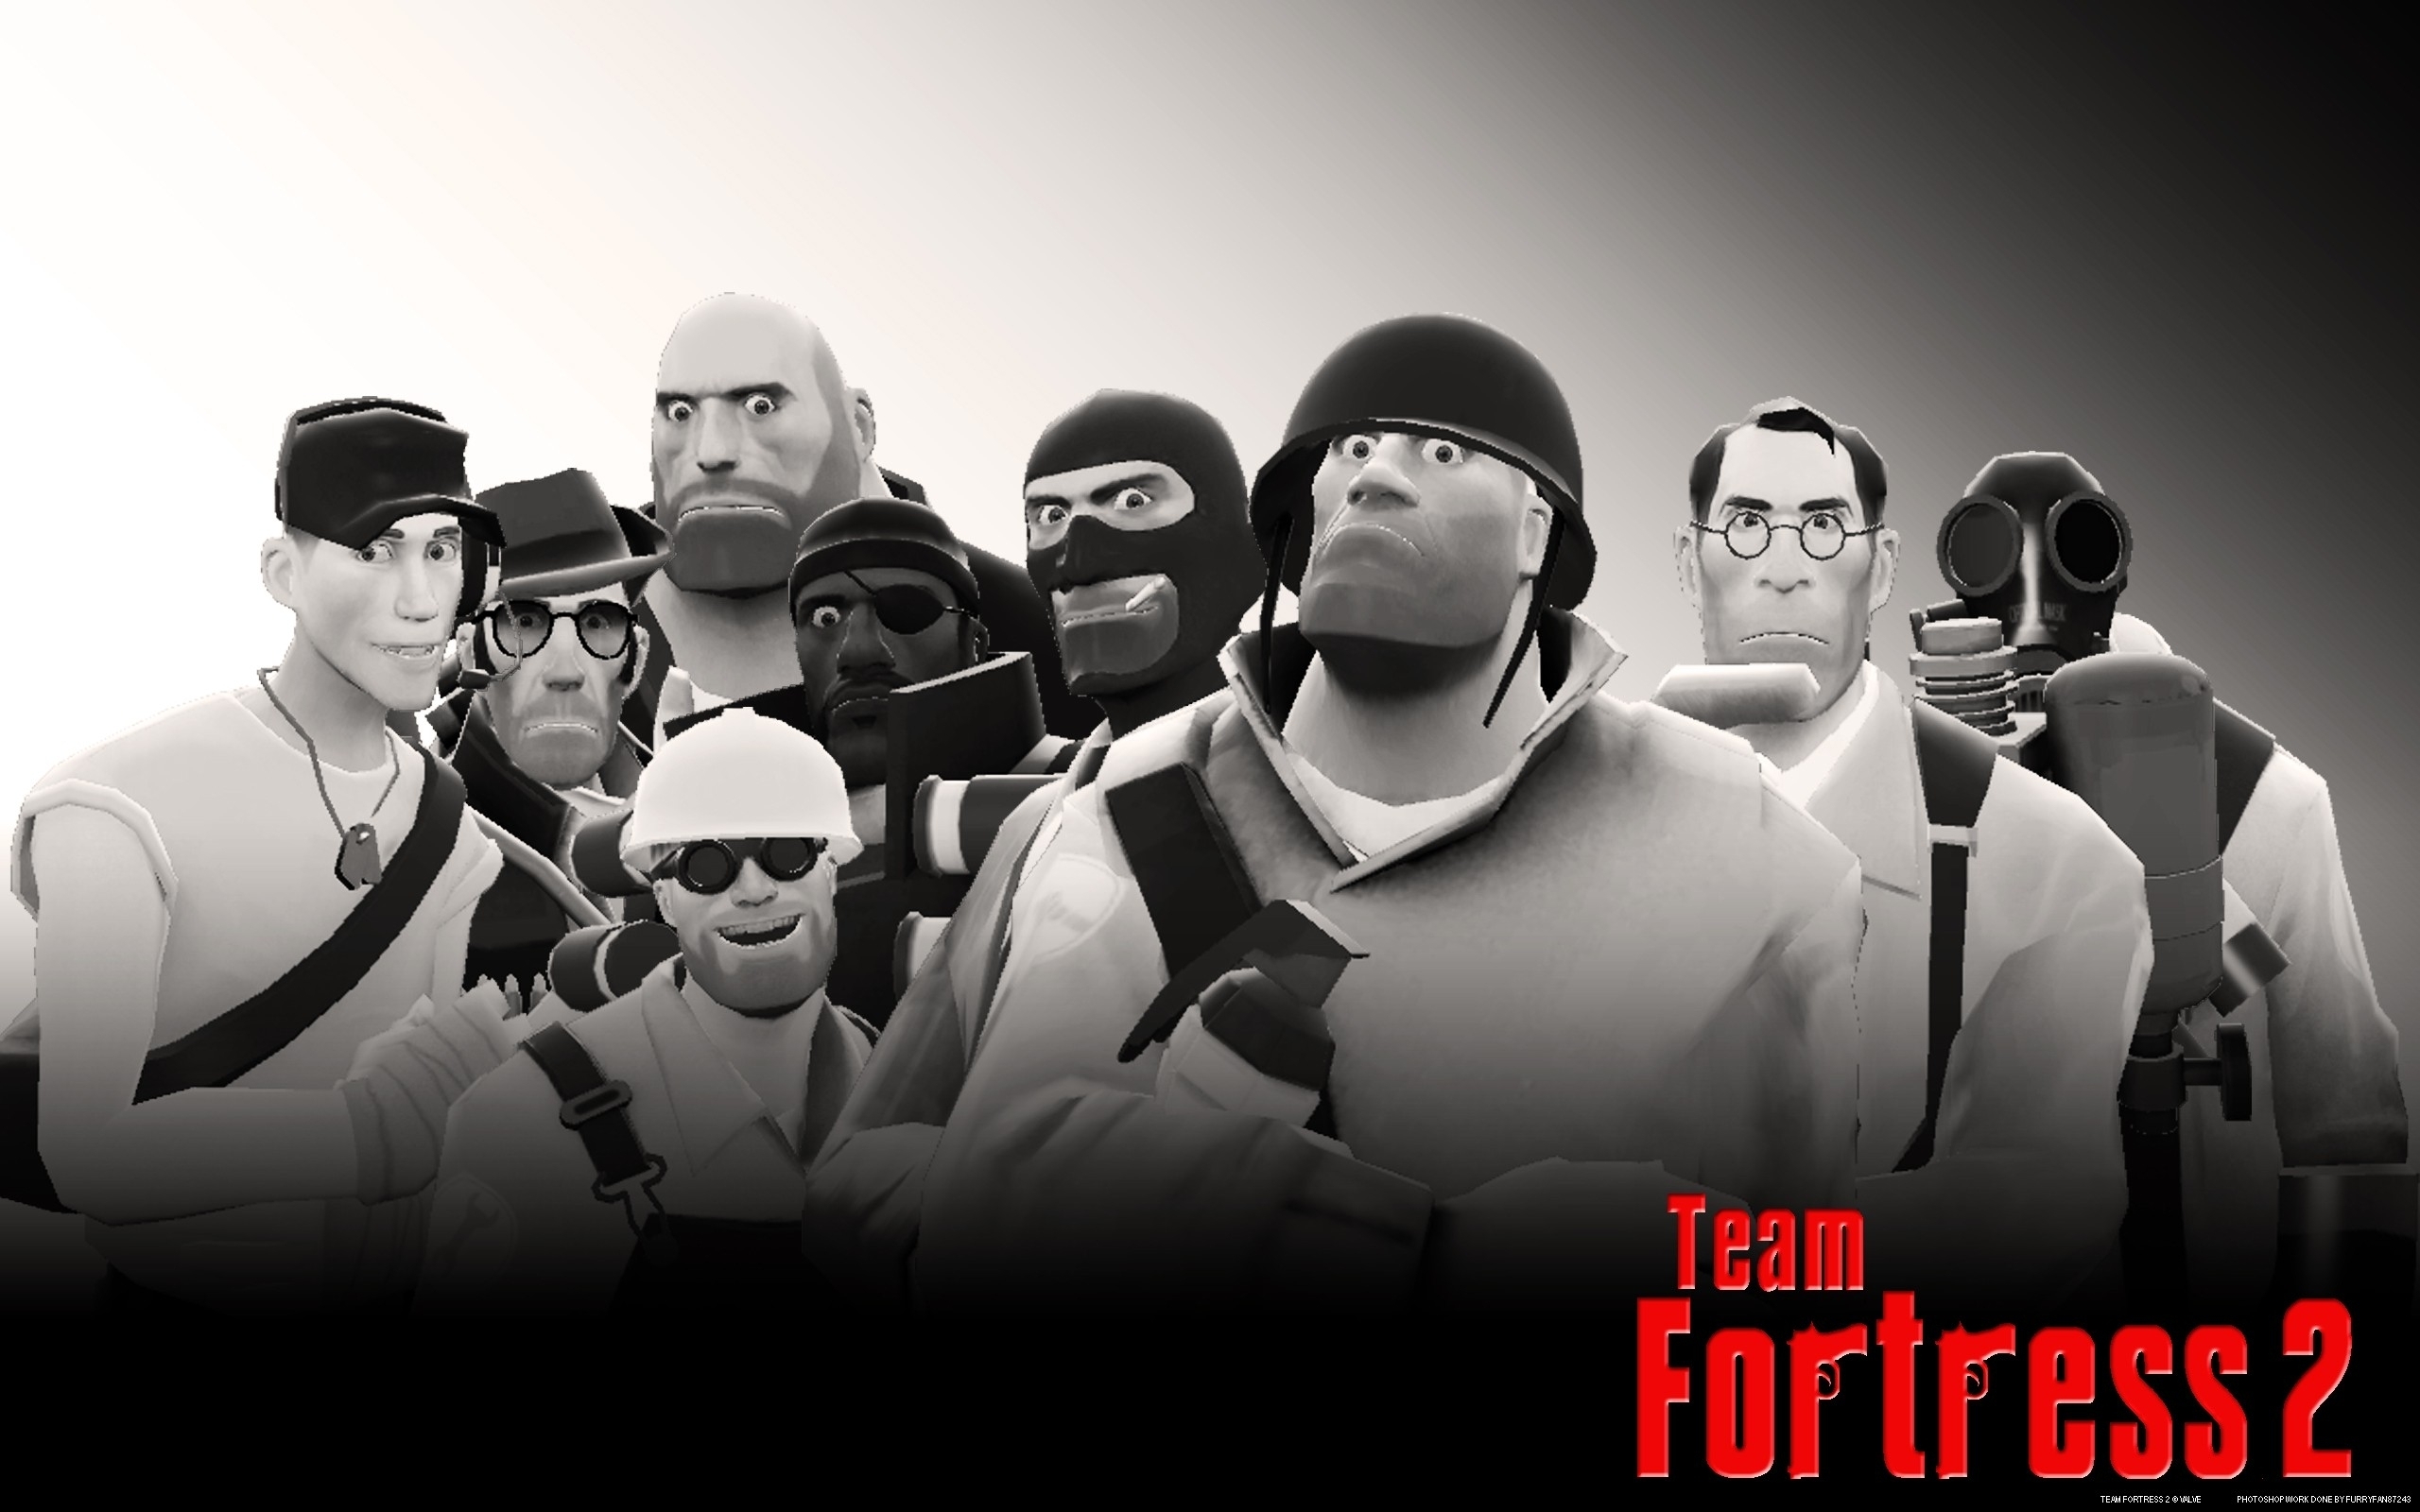  tf2 team fortress 2 sniper medic heavy scout spy HD Wallpapers